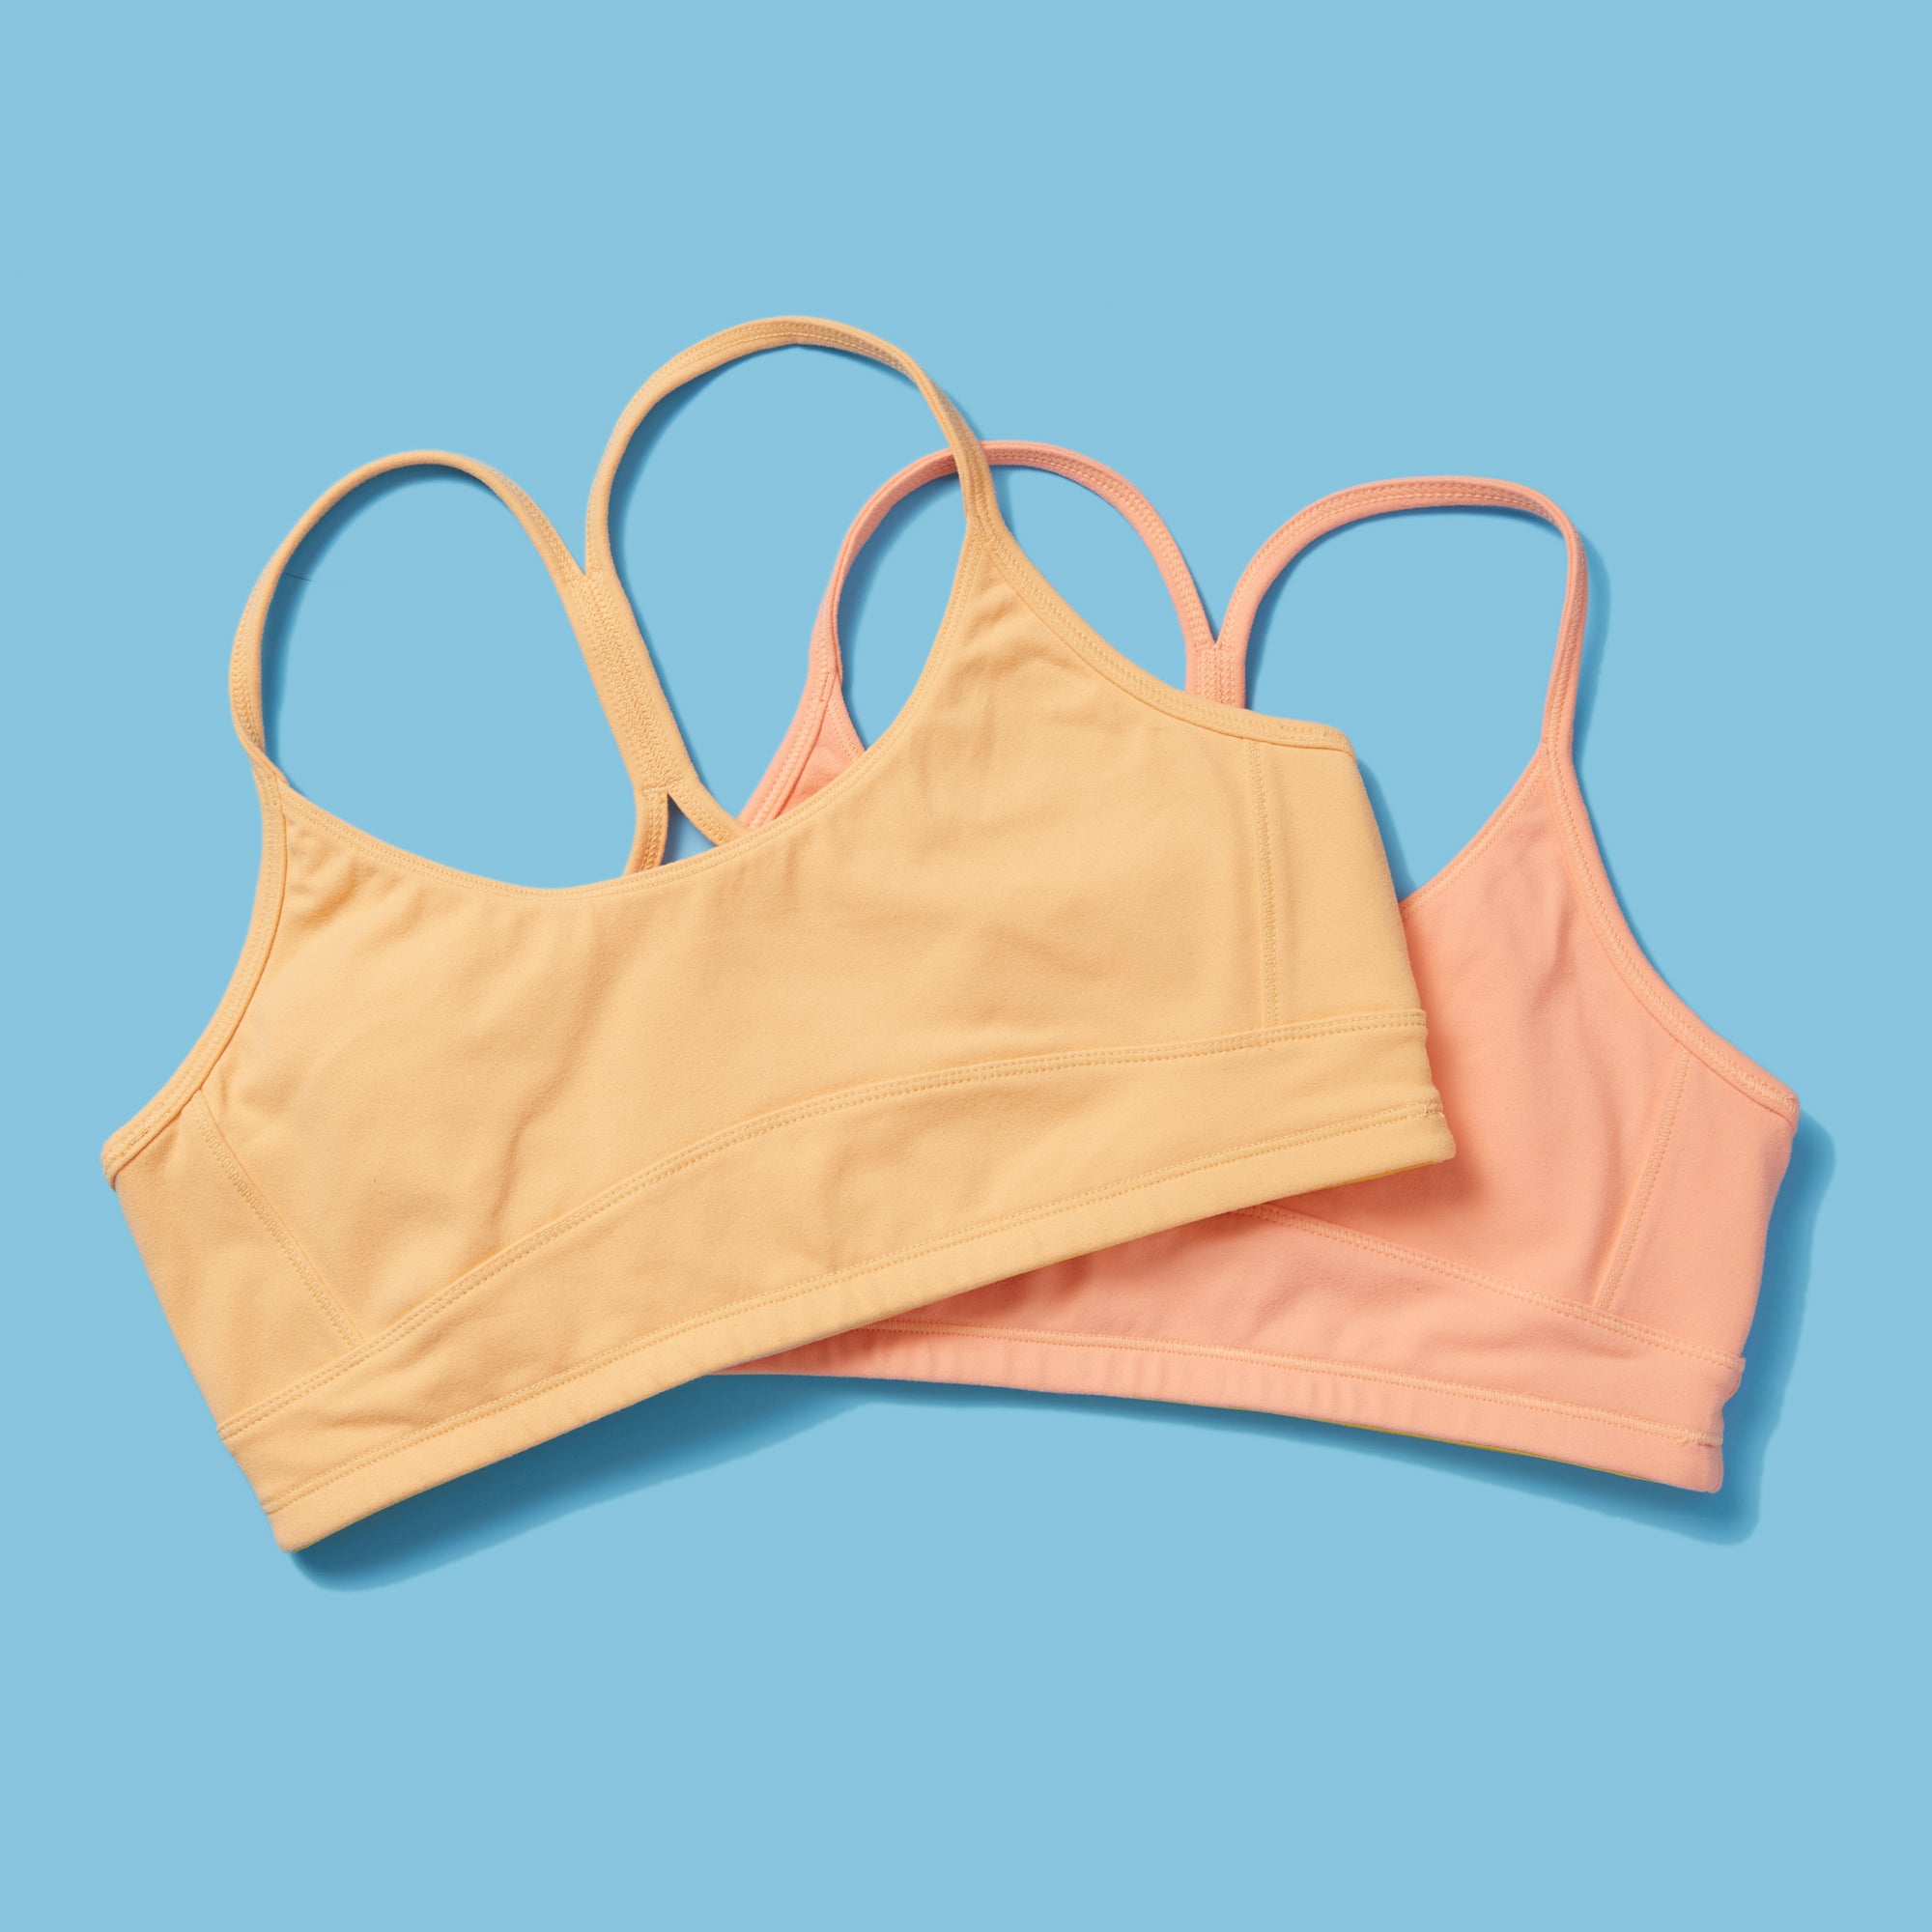 Can Wearing the Wrong Bra Cause Skin Irritation? Examining the Risks